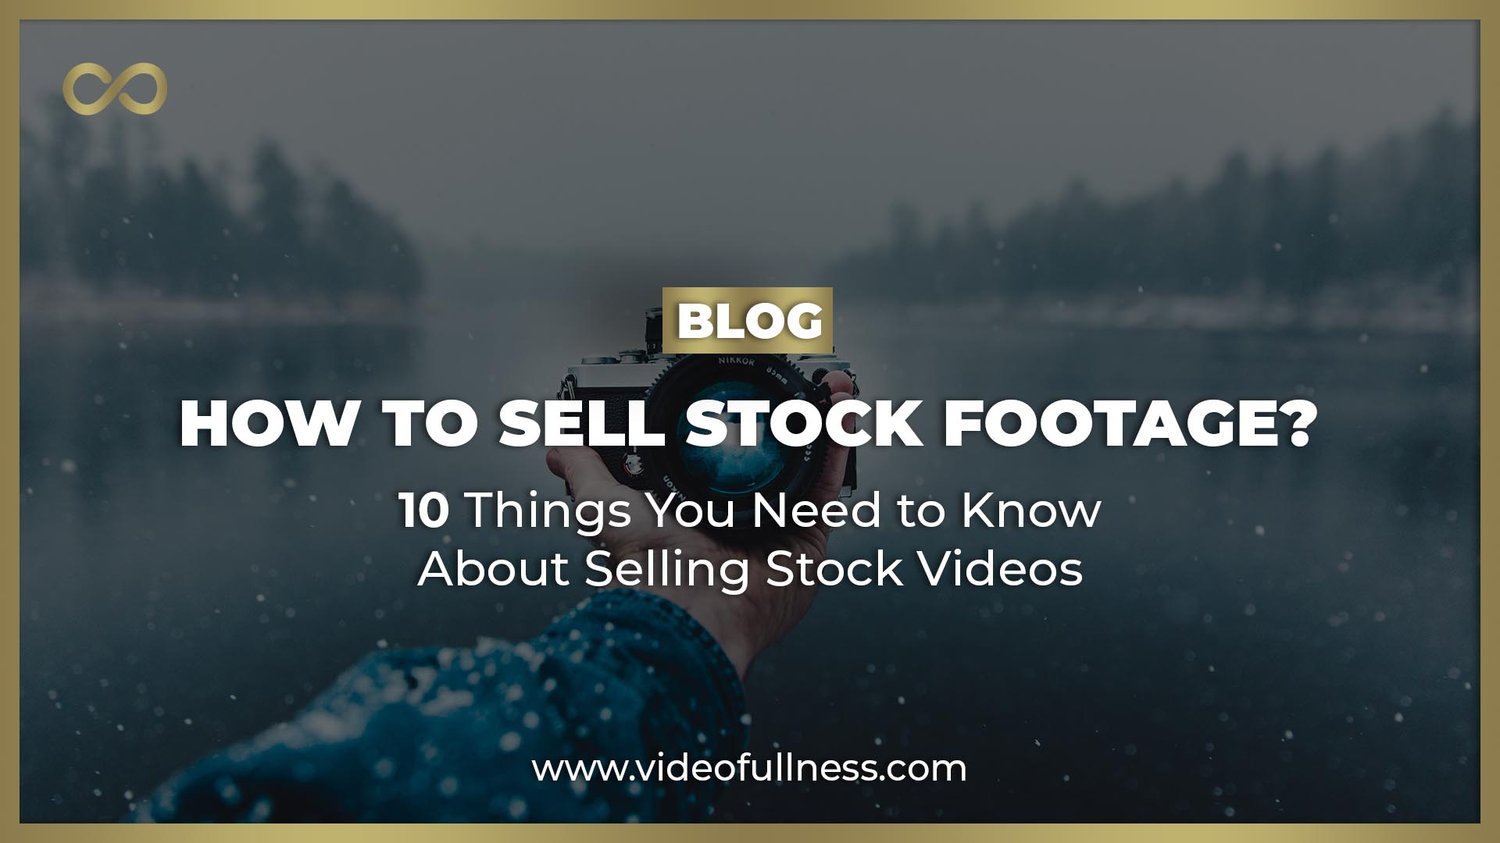 How to sell stock footage?